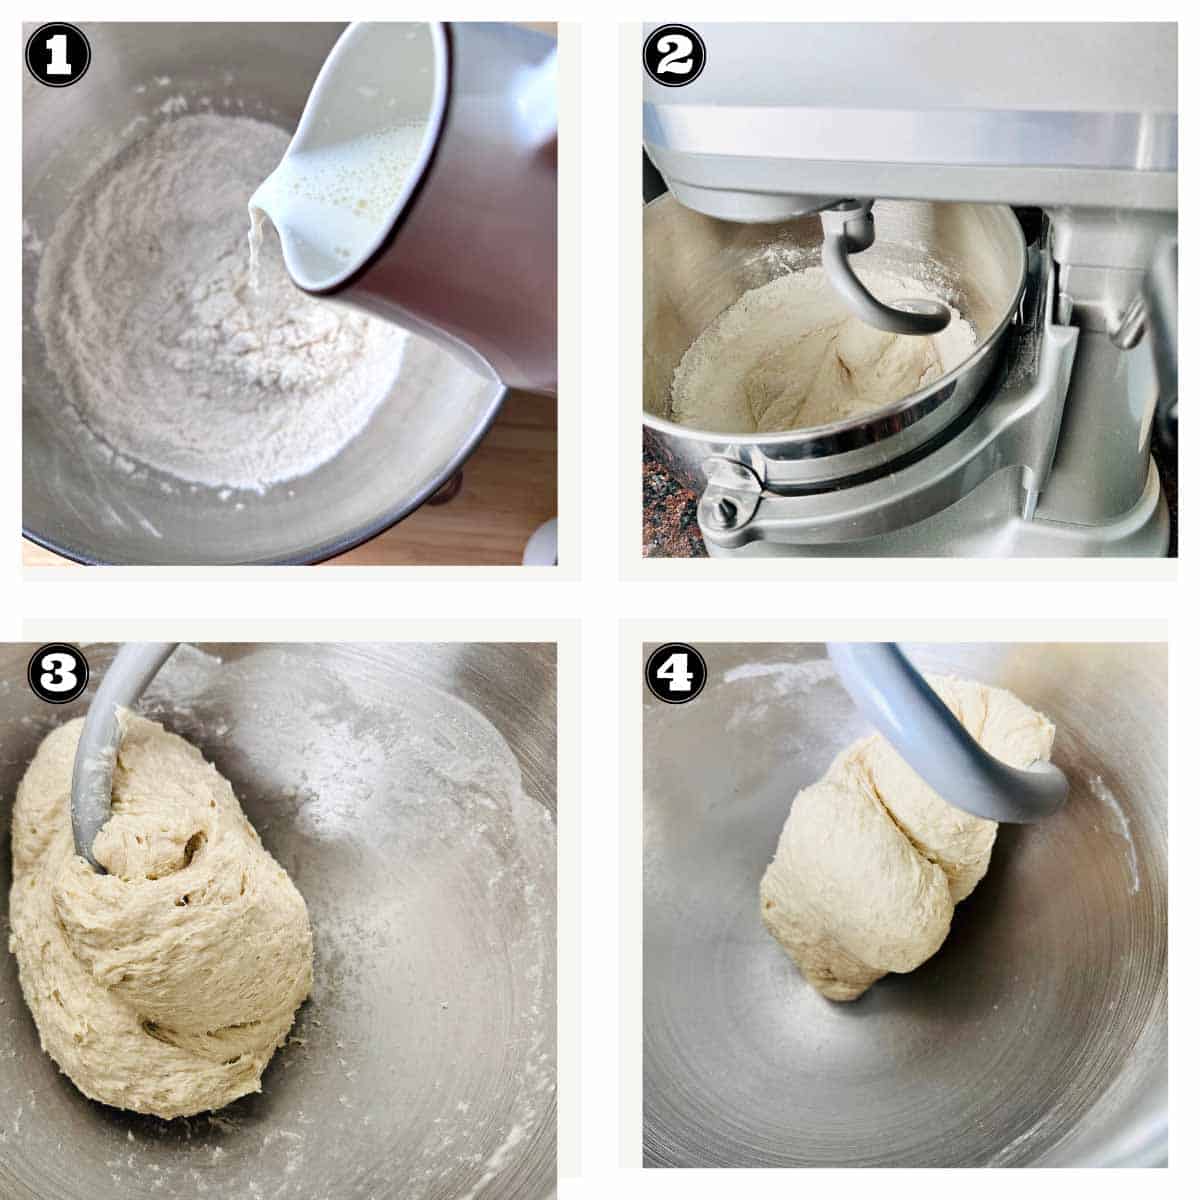 stages of kneading the dough